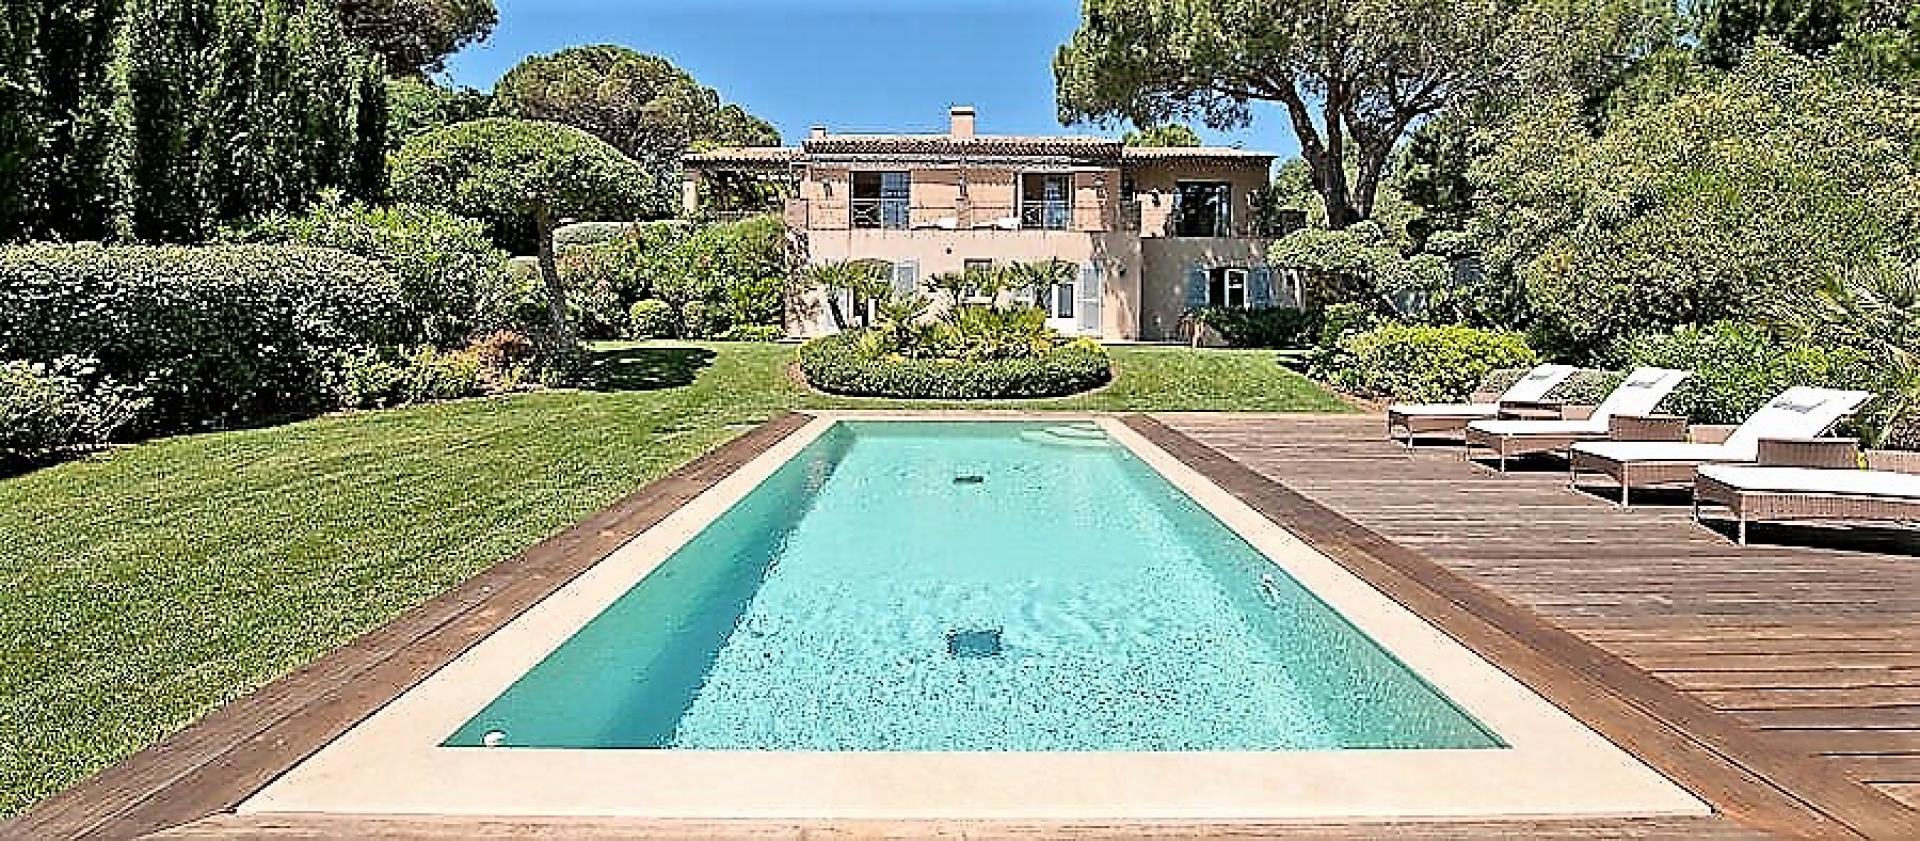 A villa to rent for your holiday in Saint Tropez, Côte d'Azur